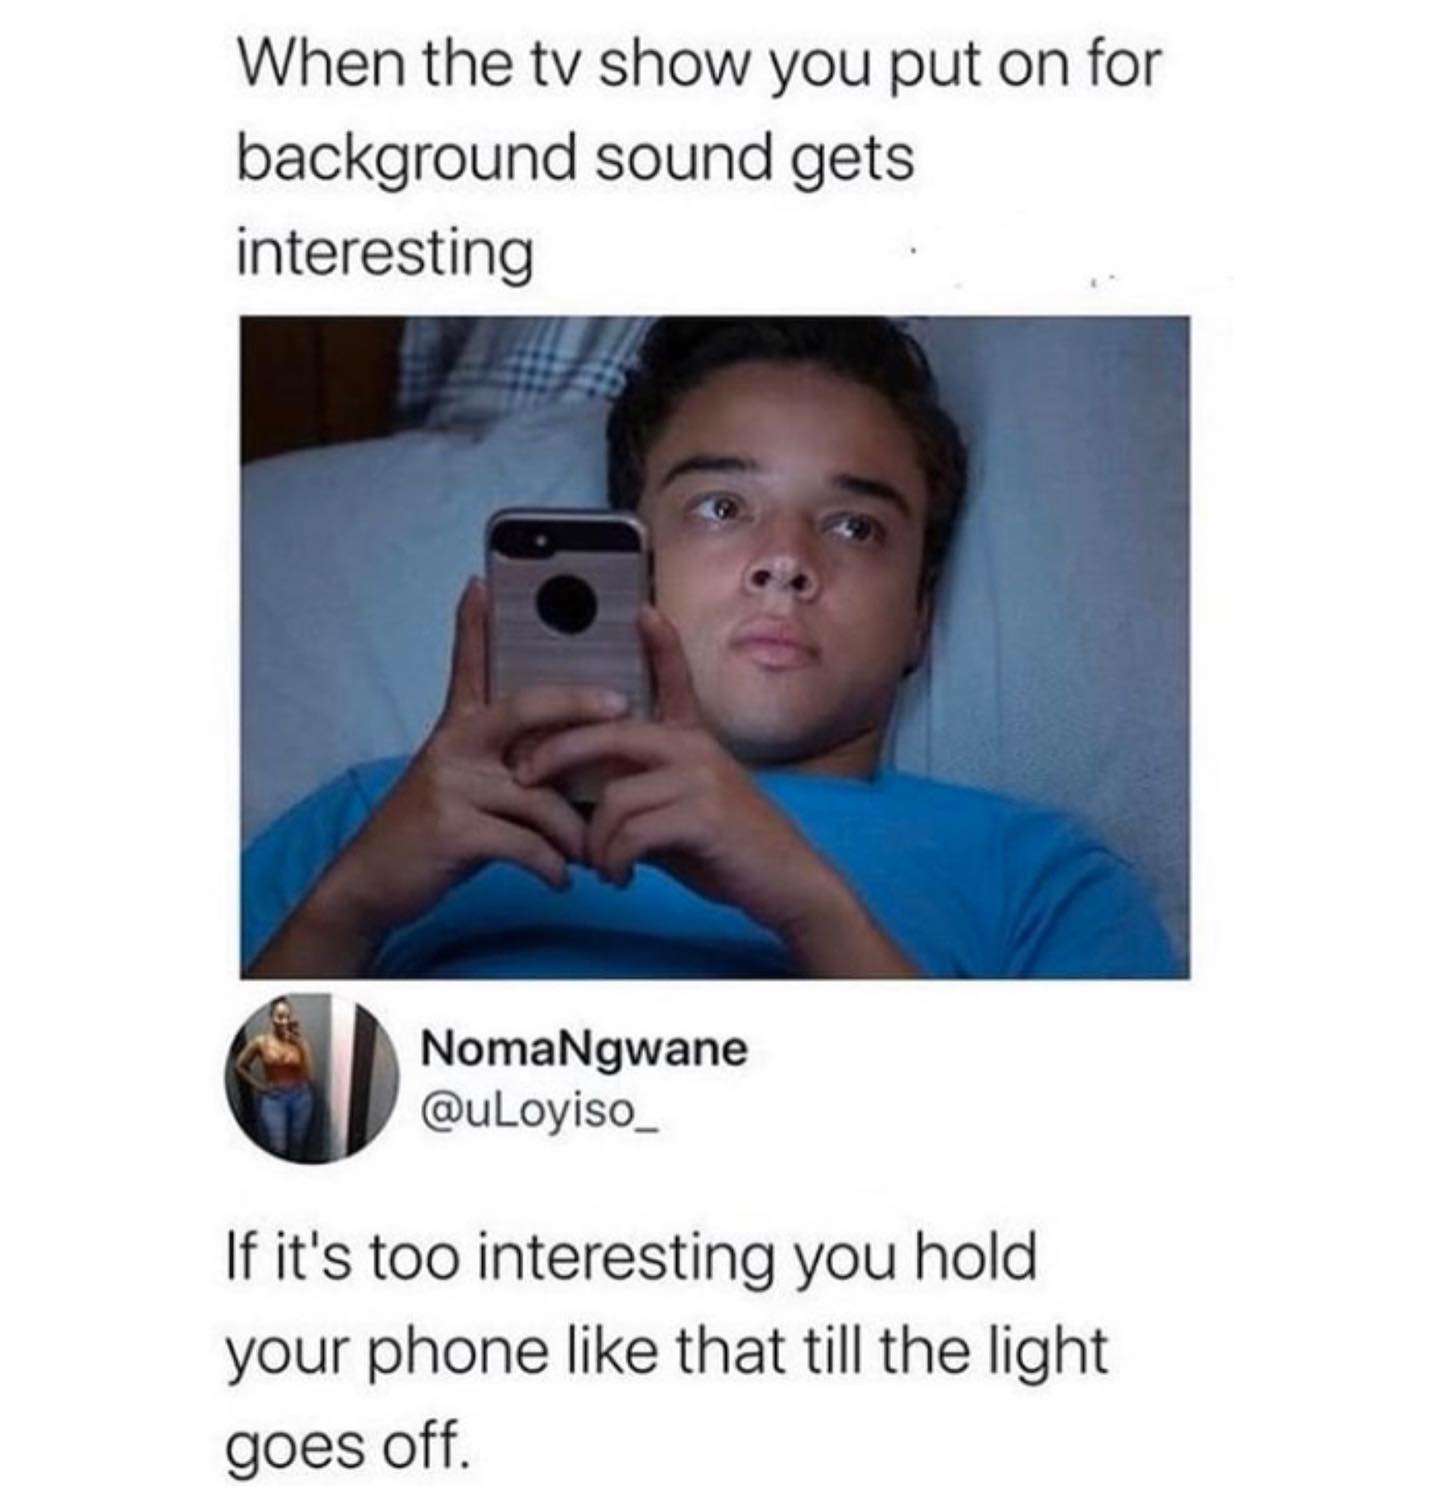 dank memes - When the tv show you put on for background sound gets interesting NomaNgwane If it's too interesting you hold your phone that till the light goes off.